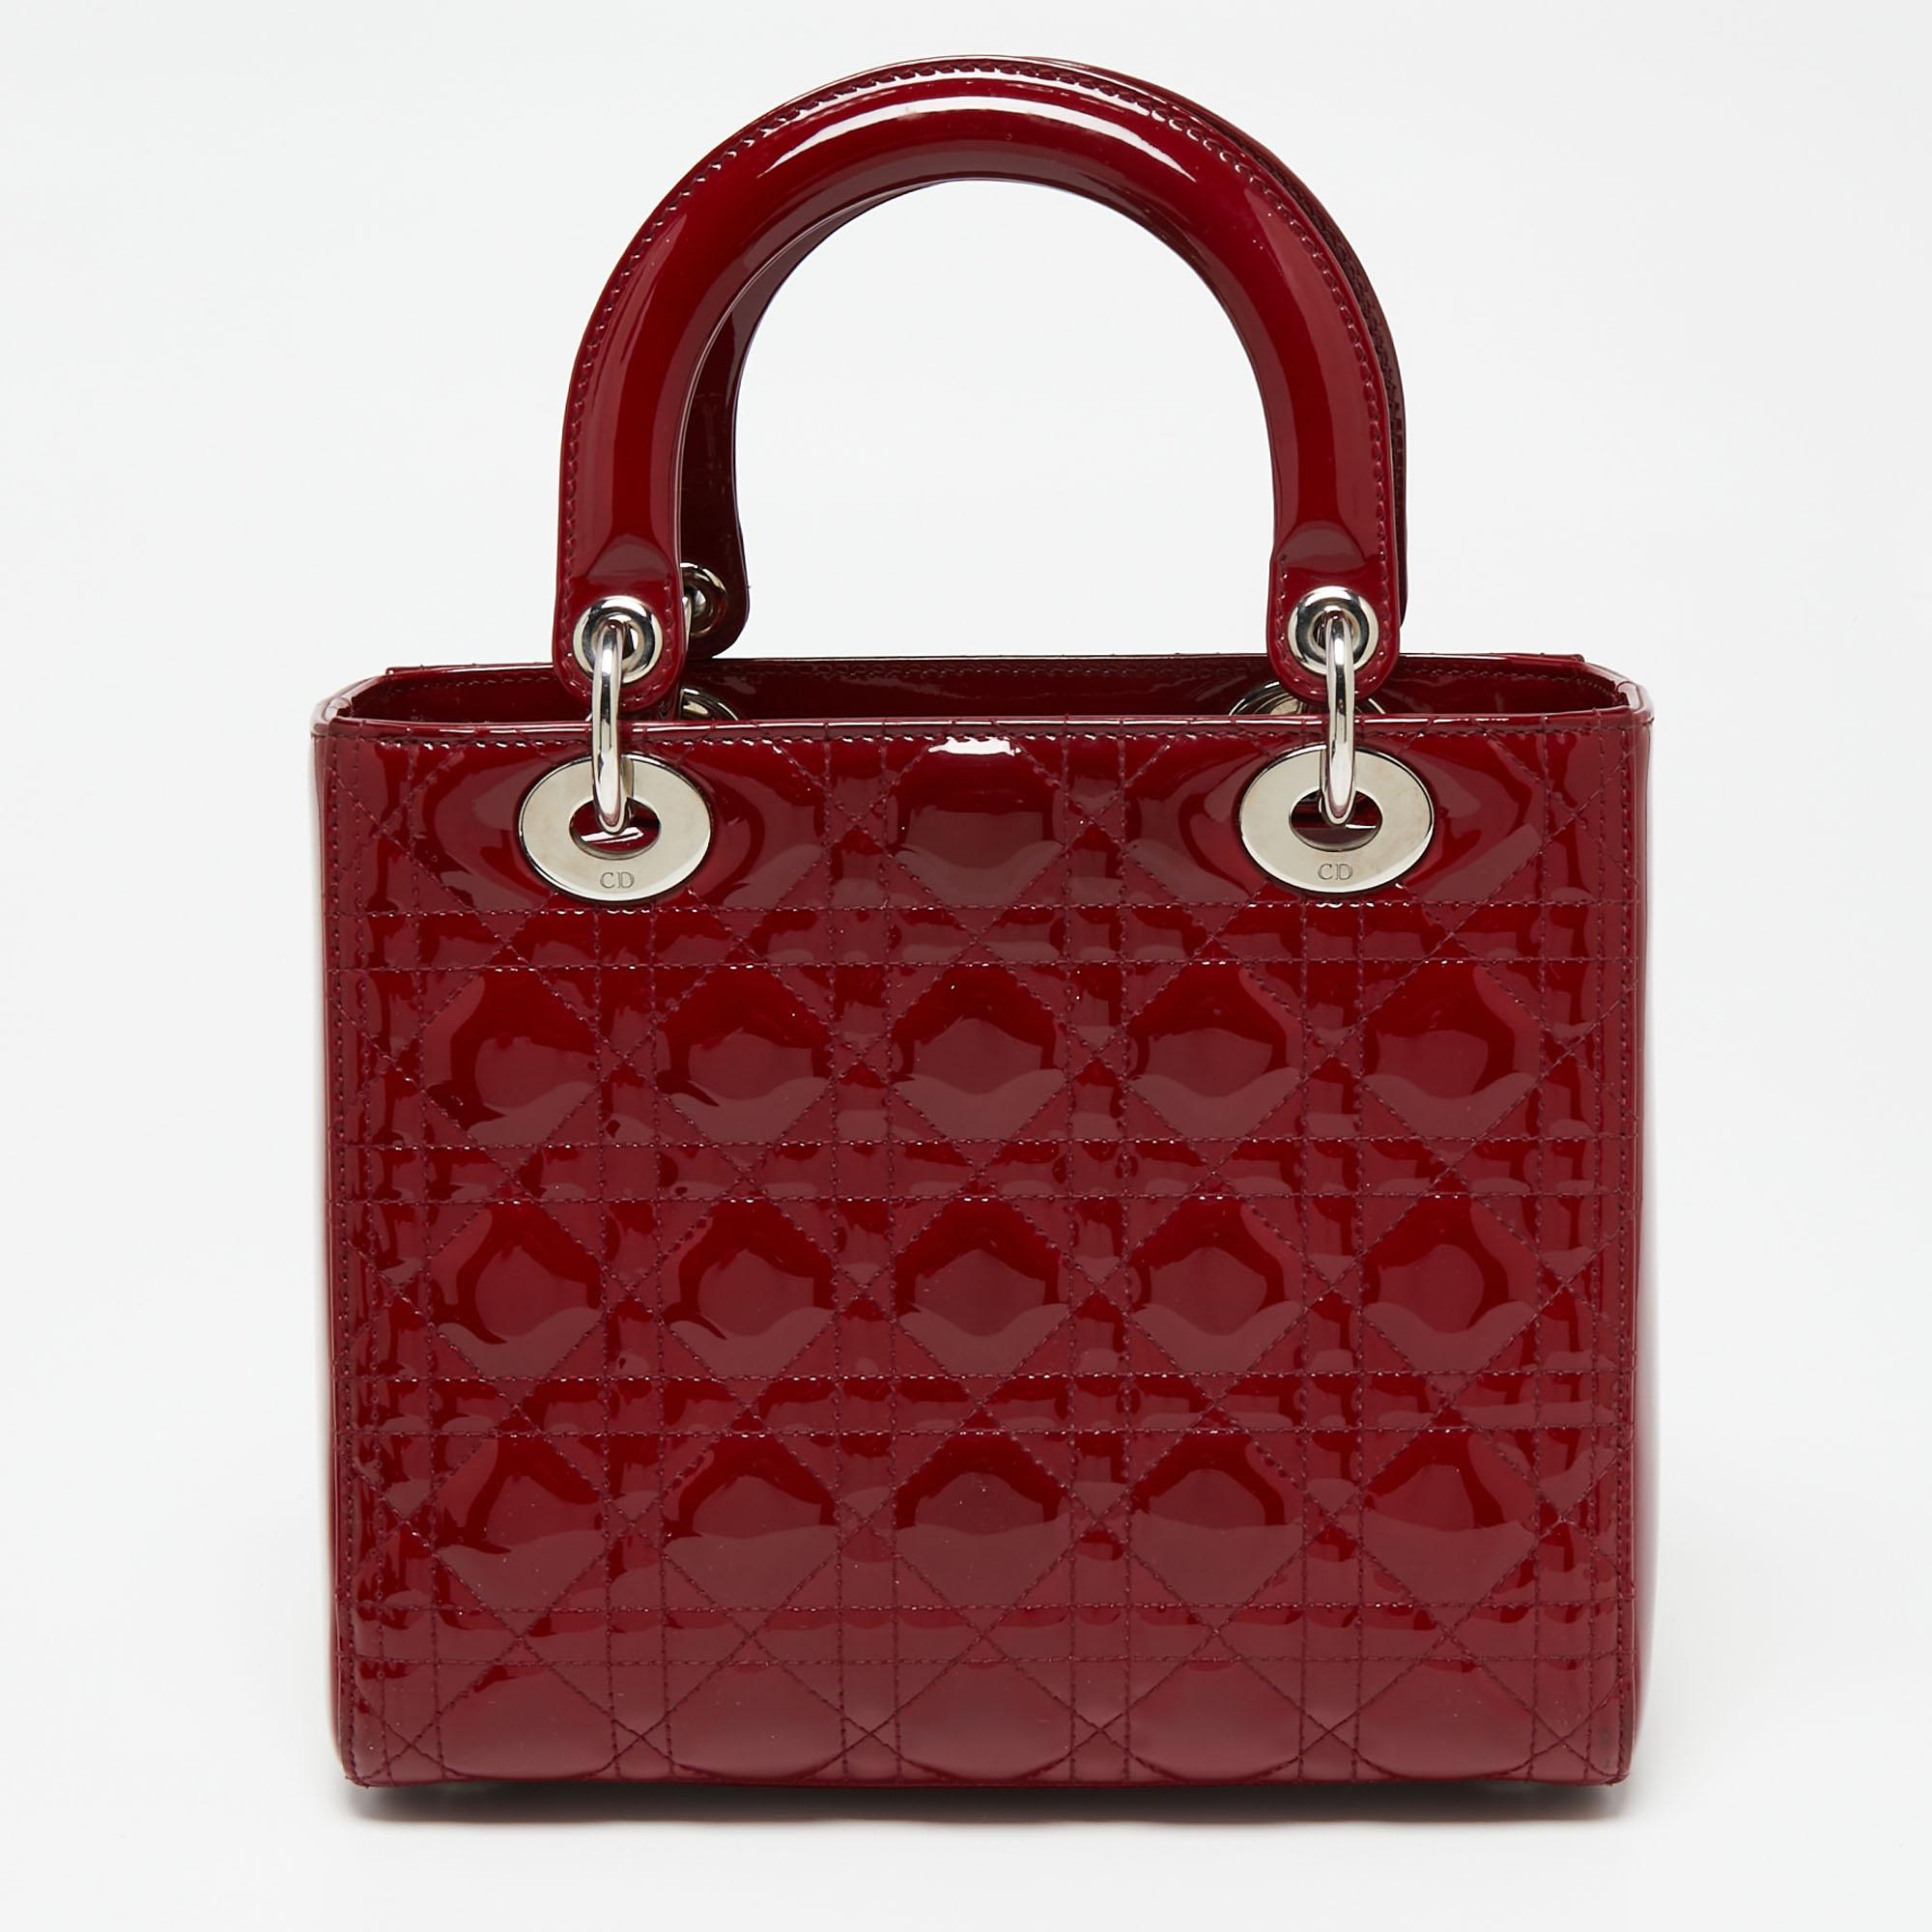 The Lady Dior tote is a Dior creation that has gained recognition worldwide and is today a coveted bag that every fashionista craves to possess. This red tote has been crafted from patent leather and it carries the signature Cannage quilt. It is